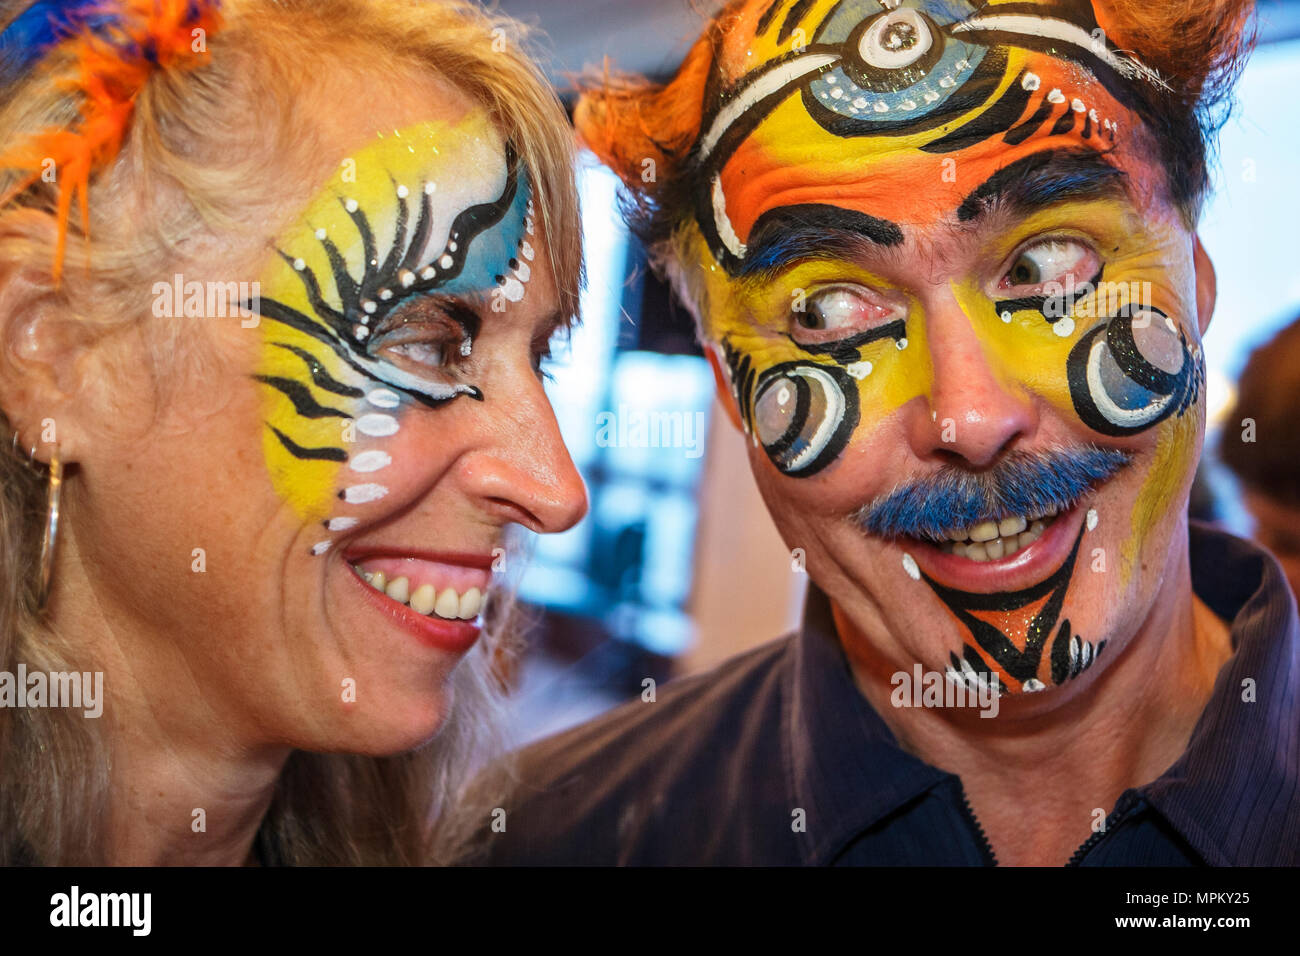 Quebec Canada,Upper Town,Hilton,hotel,reception,party,painted faces,face painting,woman female women,man men male,Canada070709049 Stock Photo